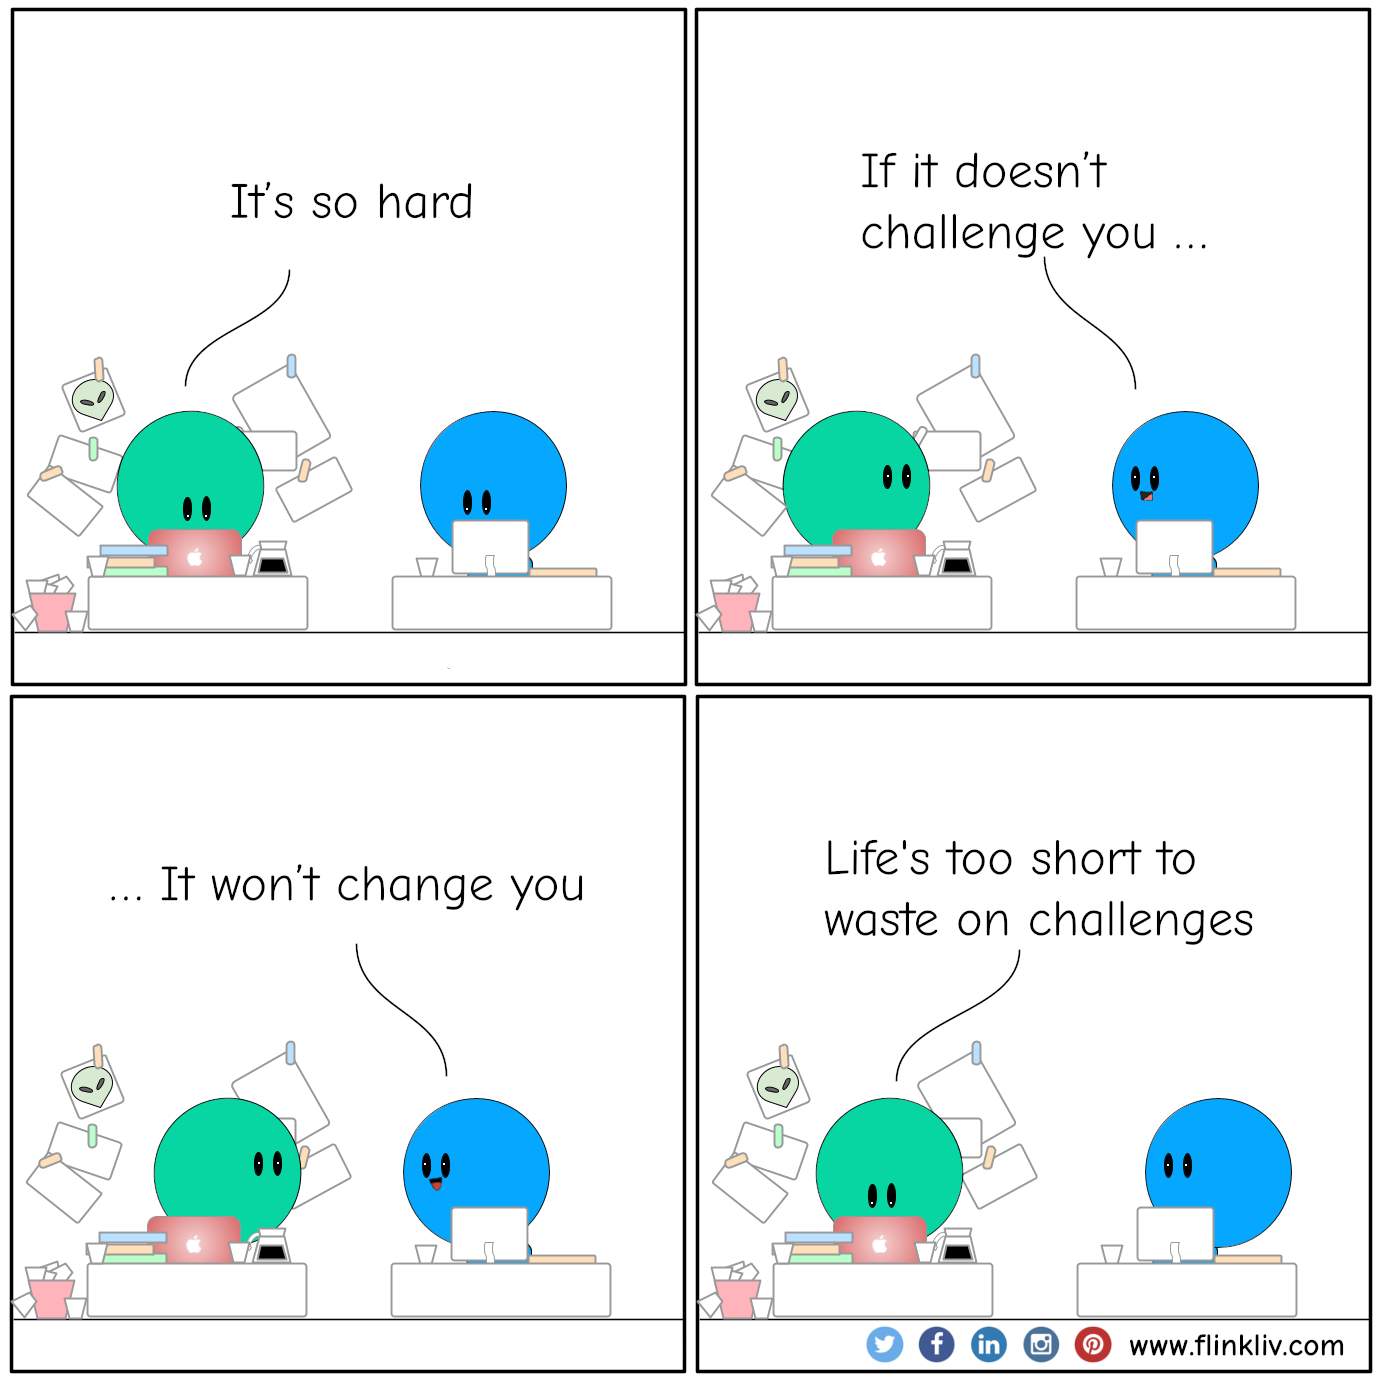 A: It’s so hard
				B: If it doesn’t challenge you 
				B: It won’t change you
				A: Life's too short to waste on challenges
              